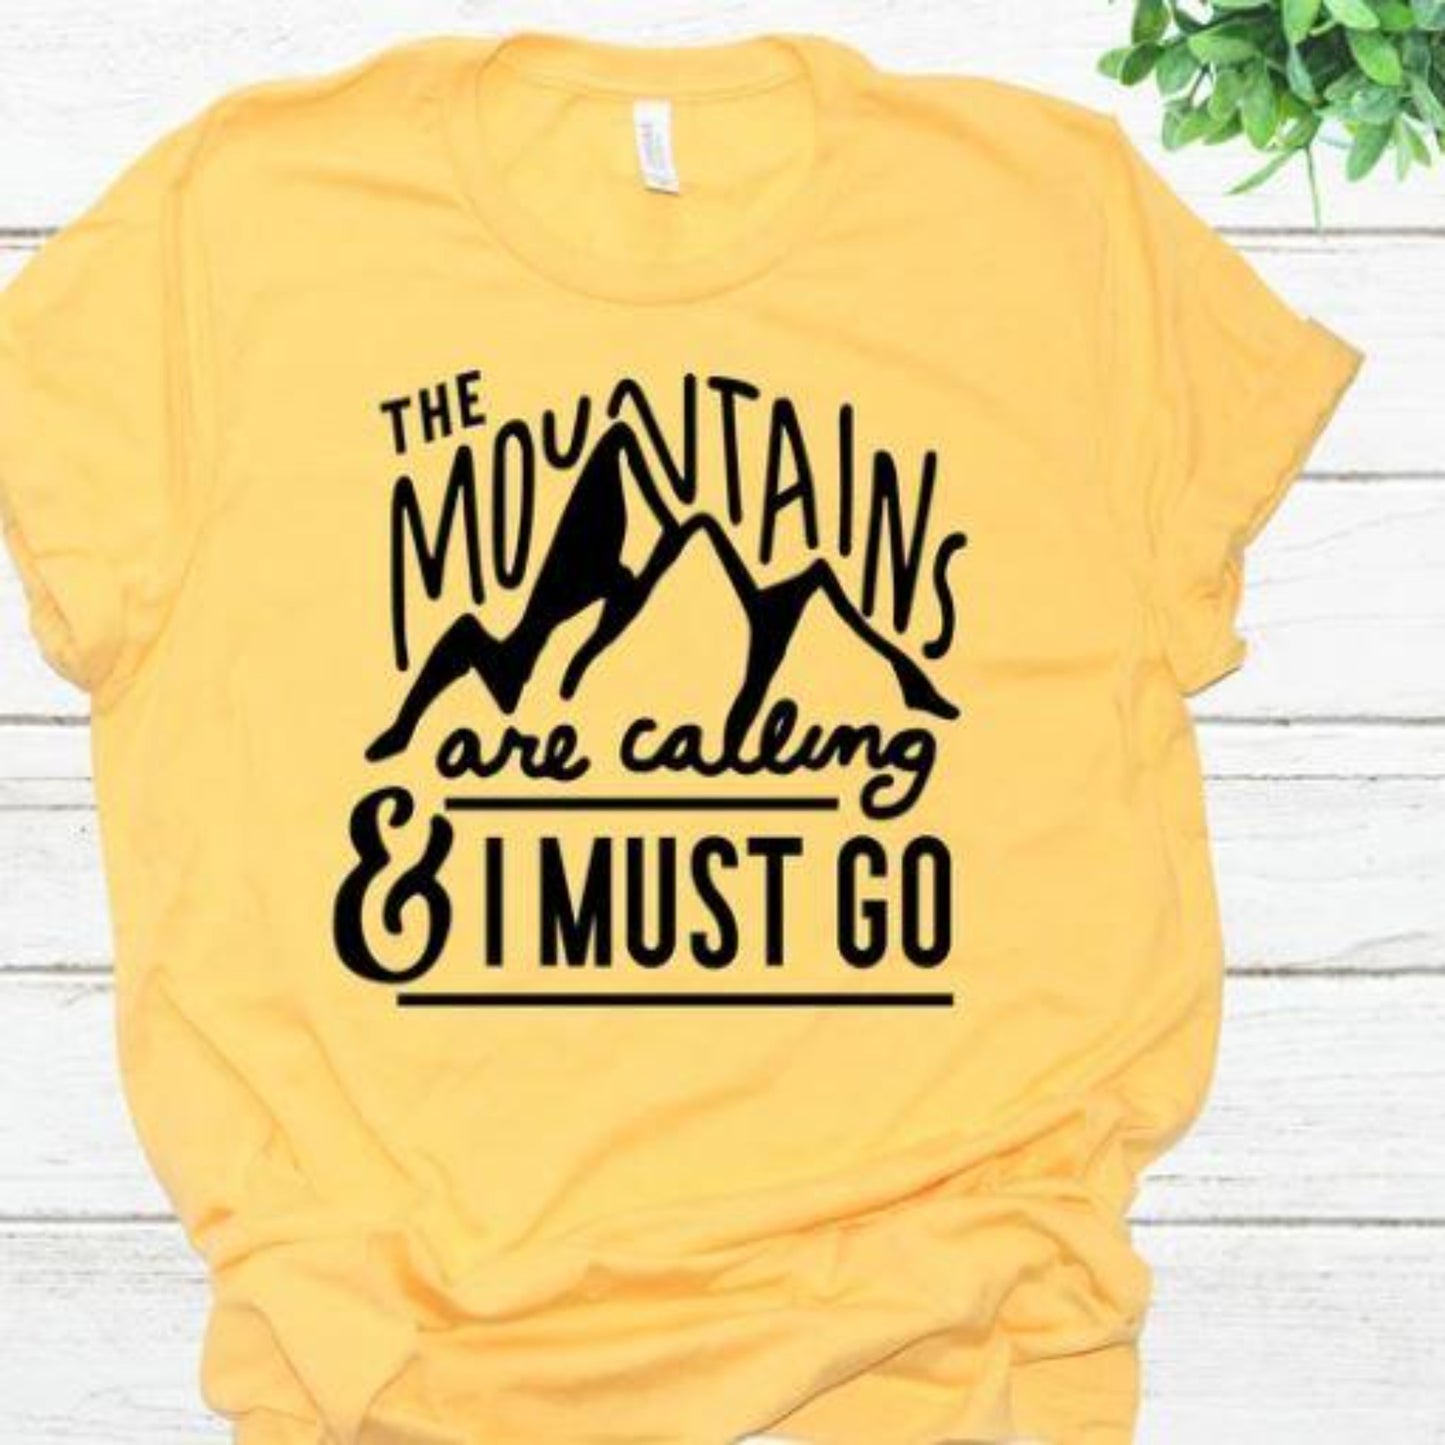 mountains_calling adventure shirt travel specialty tee comfortable wear casual tshirt